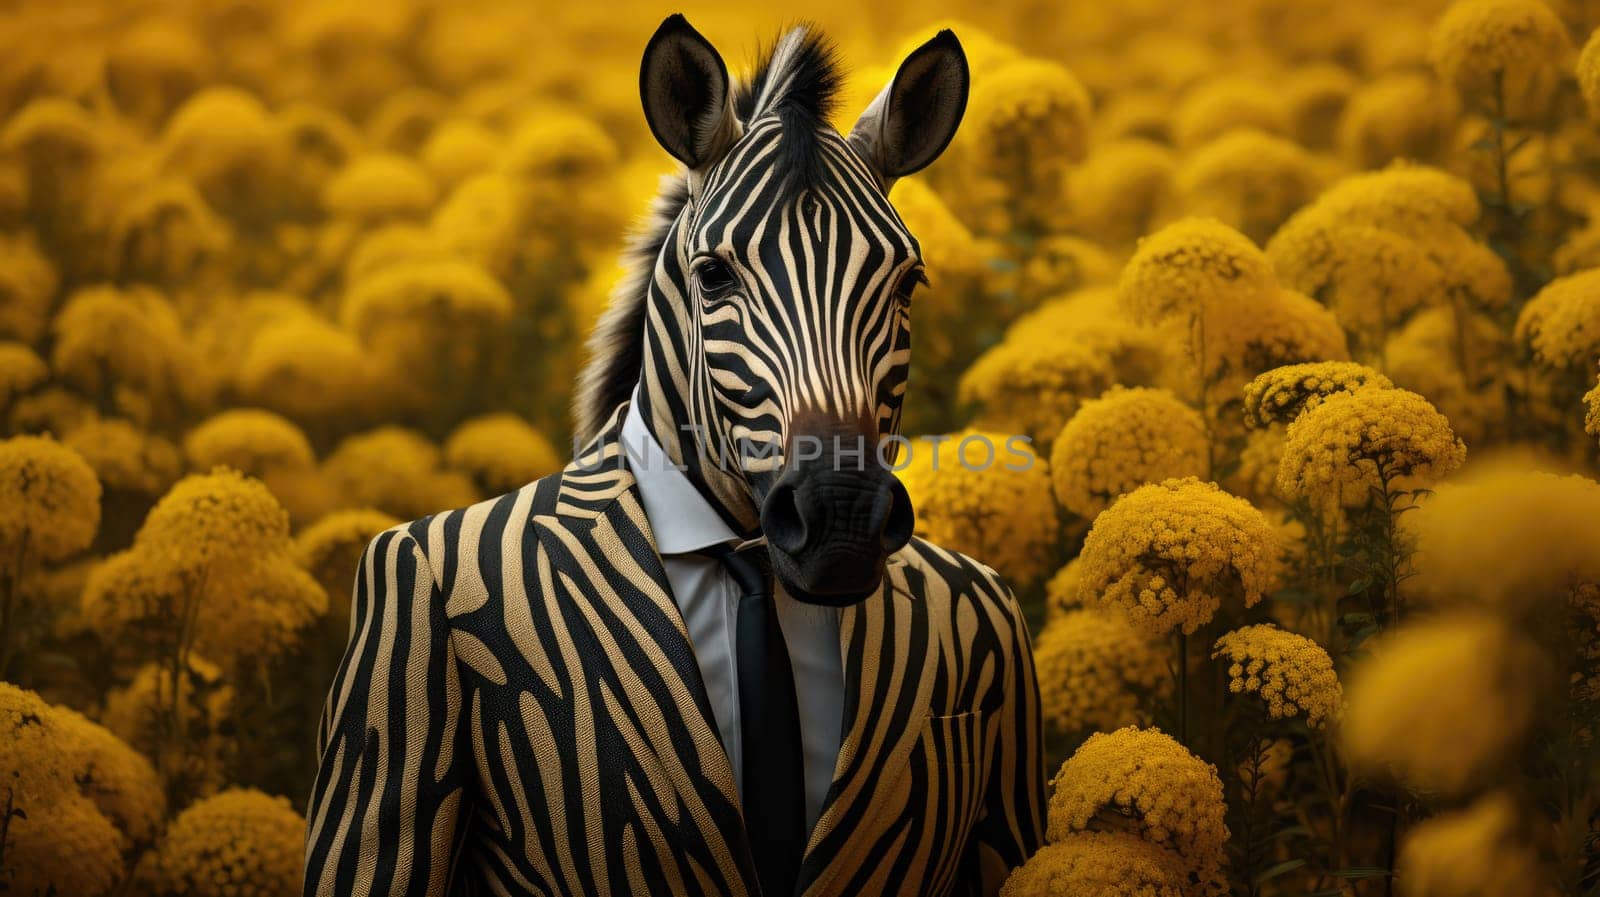 Zebra dressed in a suit, in a fantastical field of blossoming yellow flowers by natali_brill